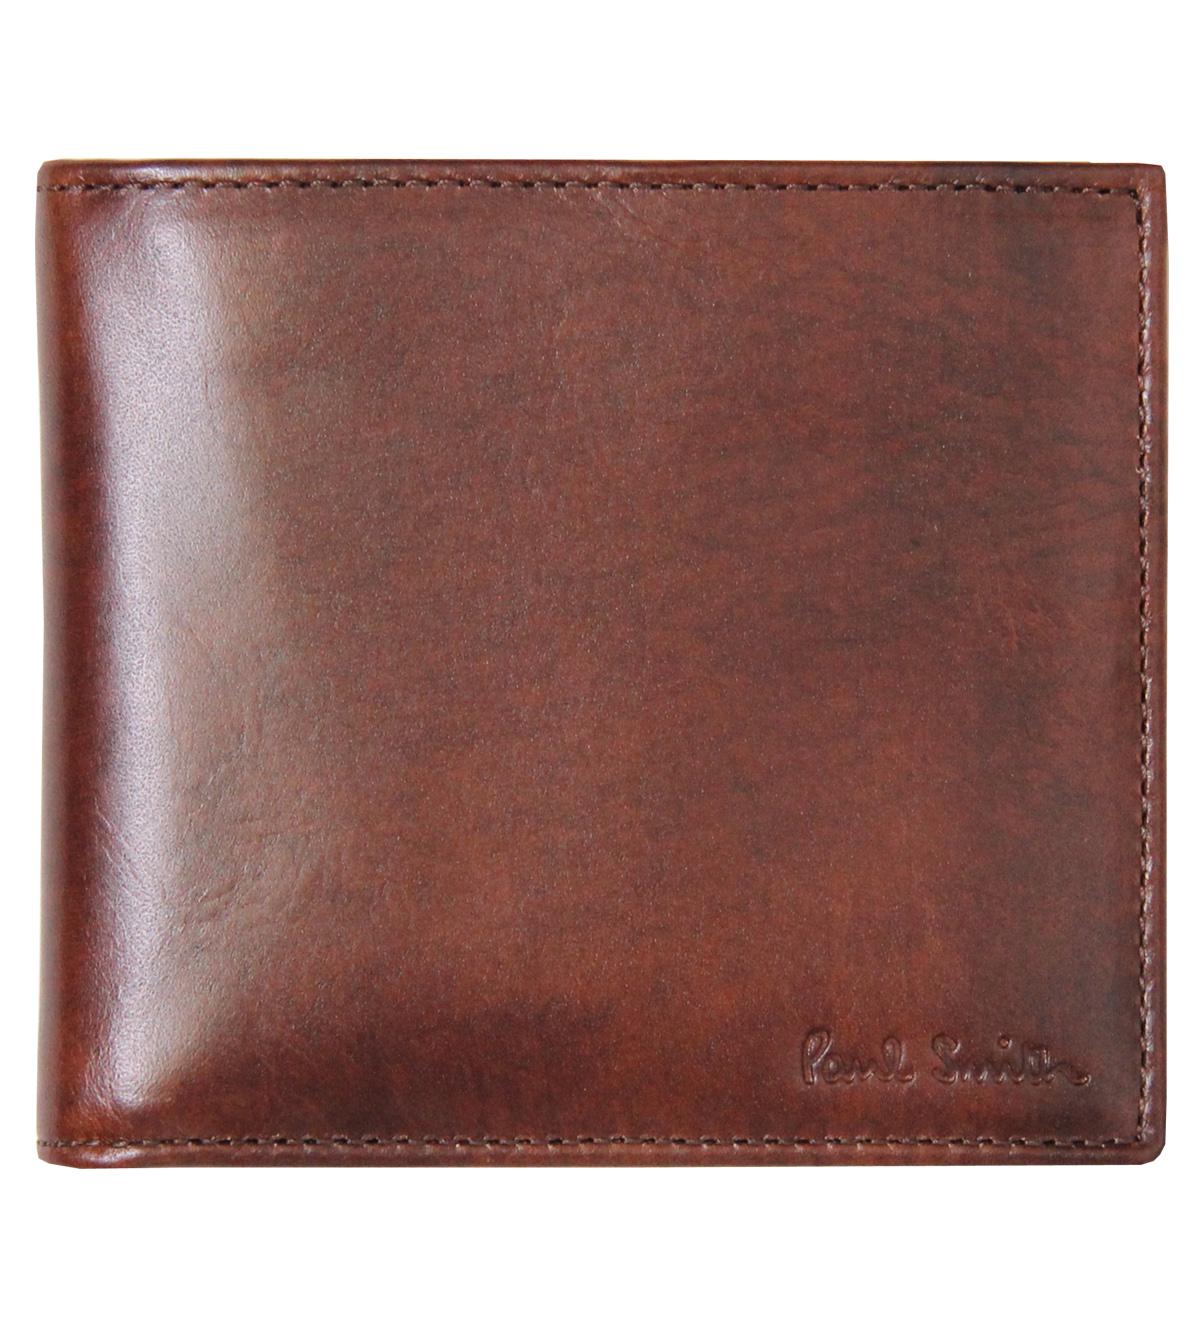 Foto Paul Smith Accessories Antique Brown Leather Wallet foto 67763